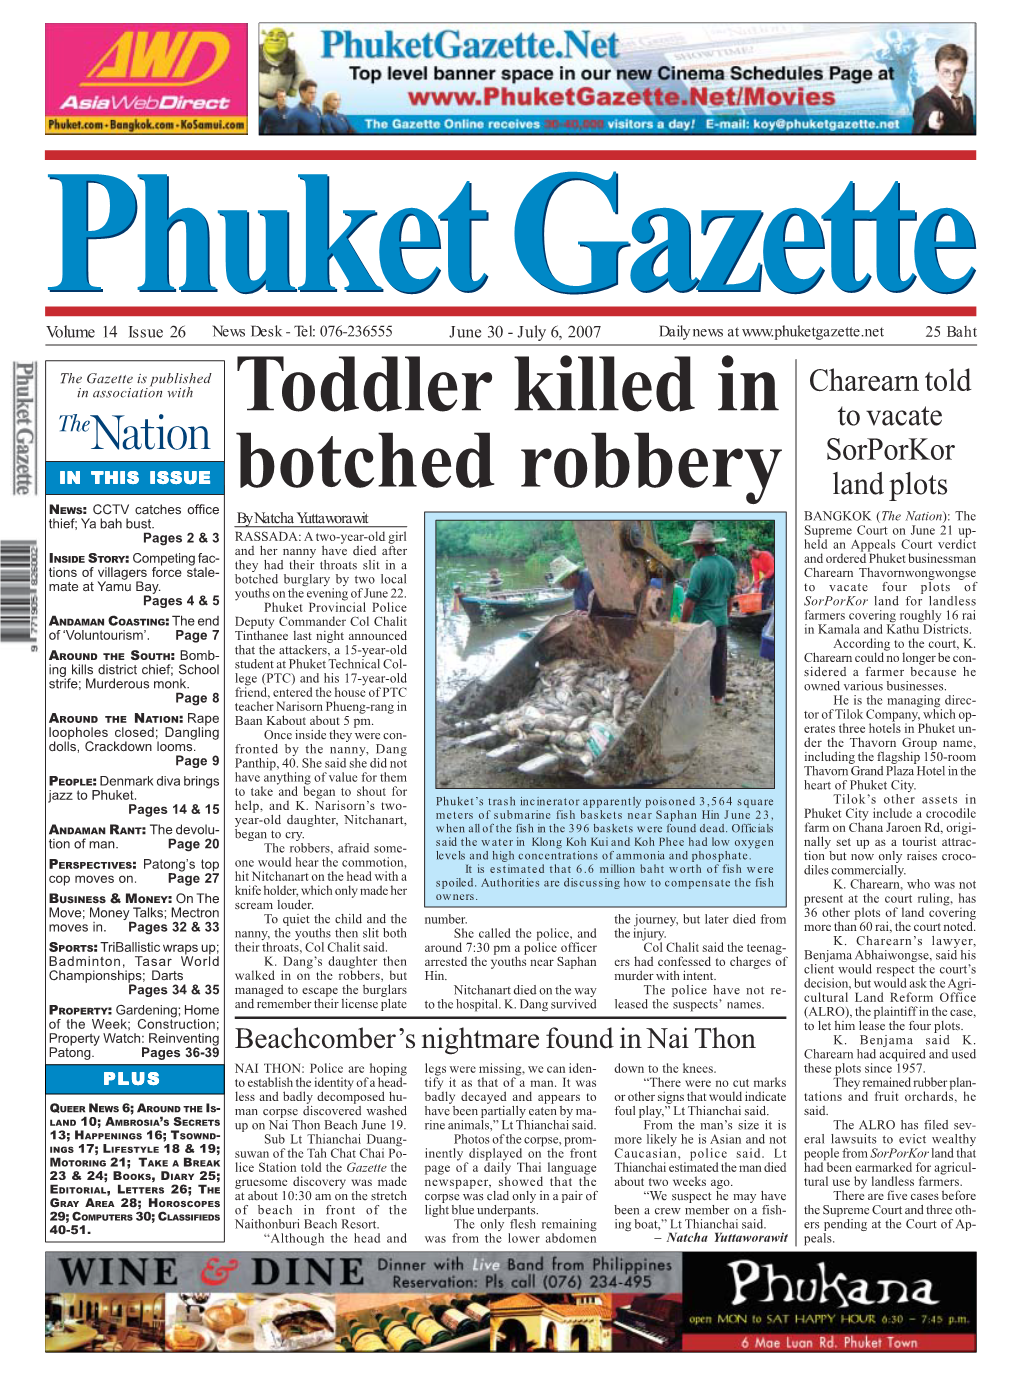 Toddler Killed in Botched Robbery